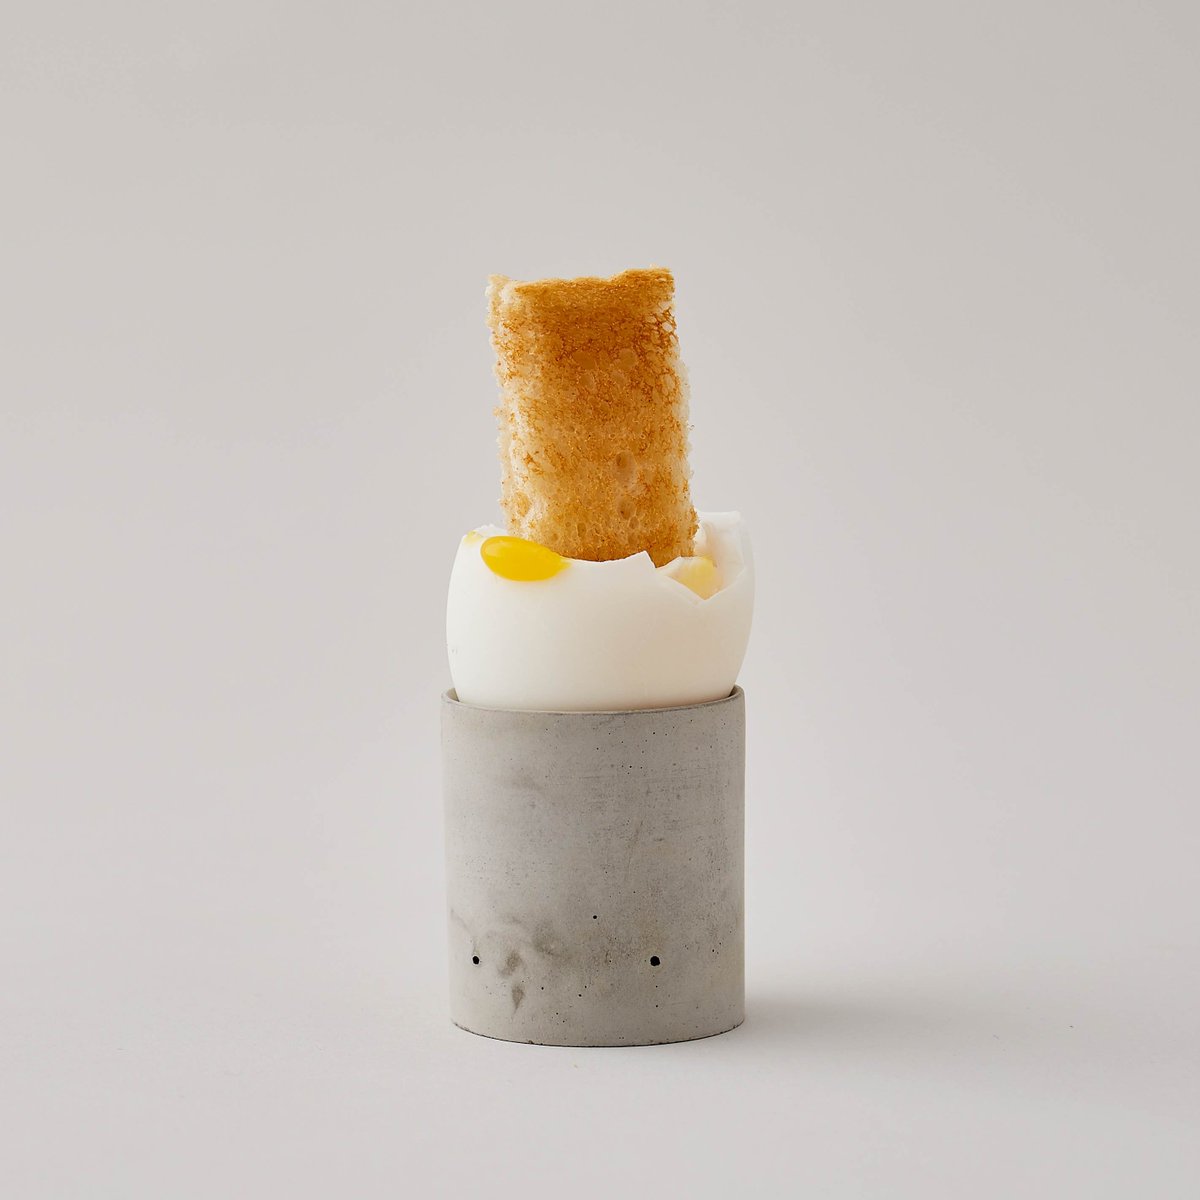 Soldiering On.
.
Simple Shape
'A collection of things from Great Britian & Ireland'
#simpleshape #simplethings #simplepleasures #madeinGB #shopindependent #madebyhand #craft #eggs #eggsforbreakfast #eggandtoast #eastergifts #concrete